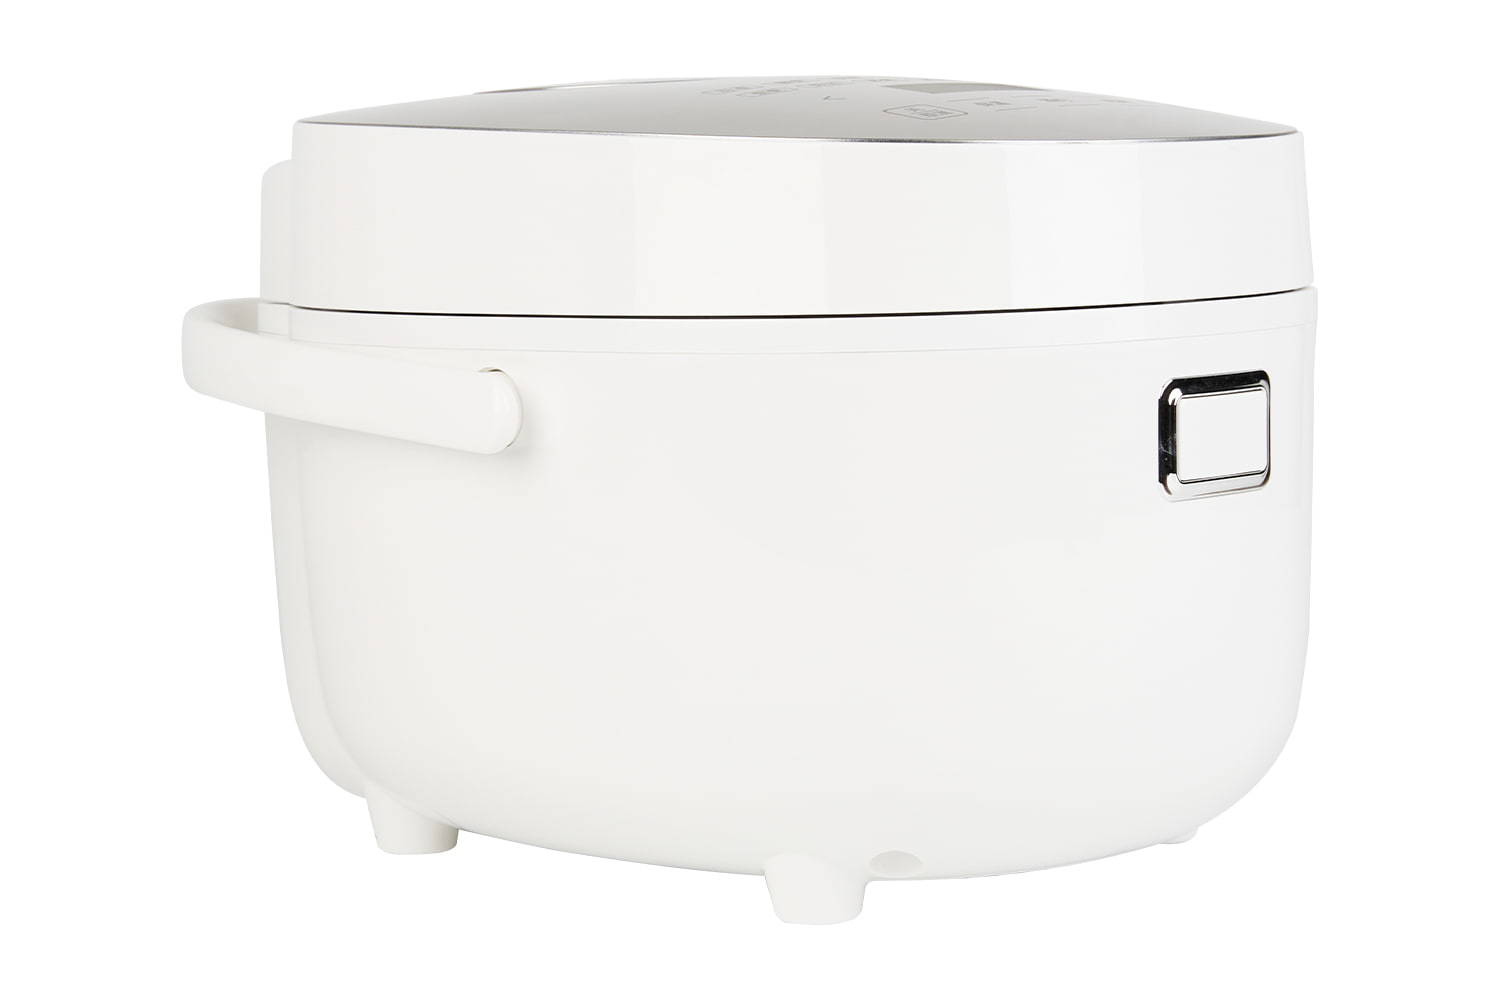 YYF-20FS02 2L IH/heating plate Multifunction Rice Cooker, 12 Menu , Steam, Soup, Cake